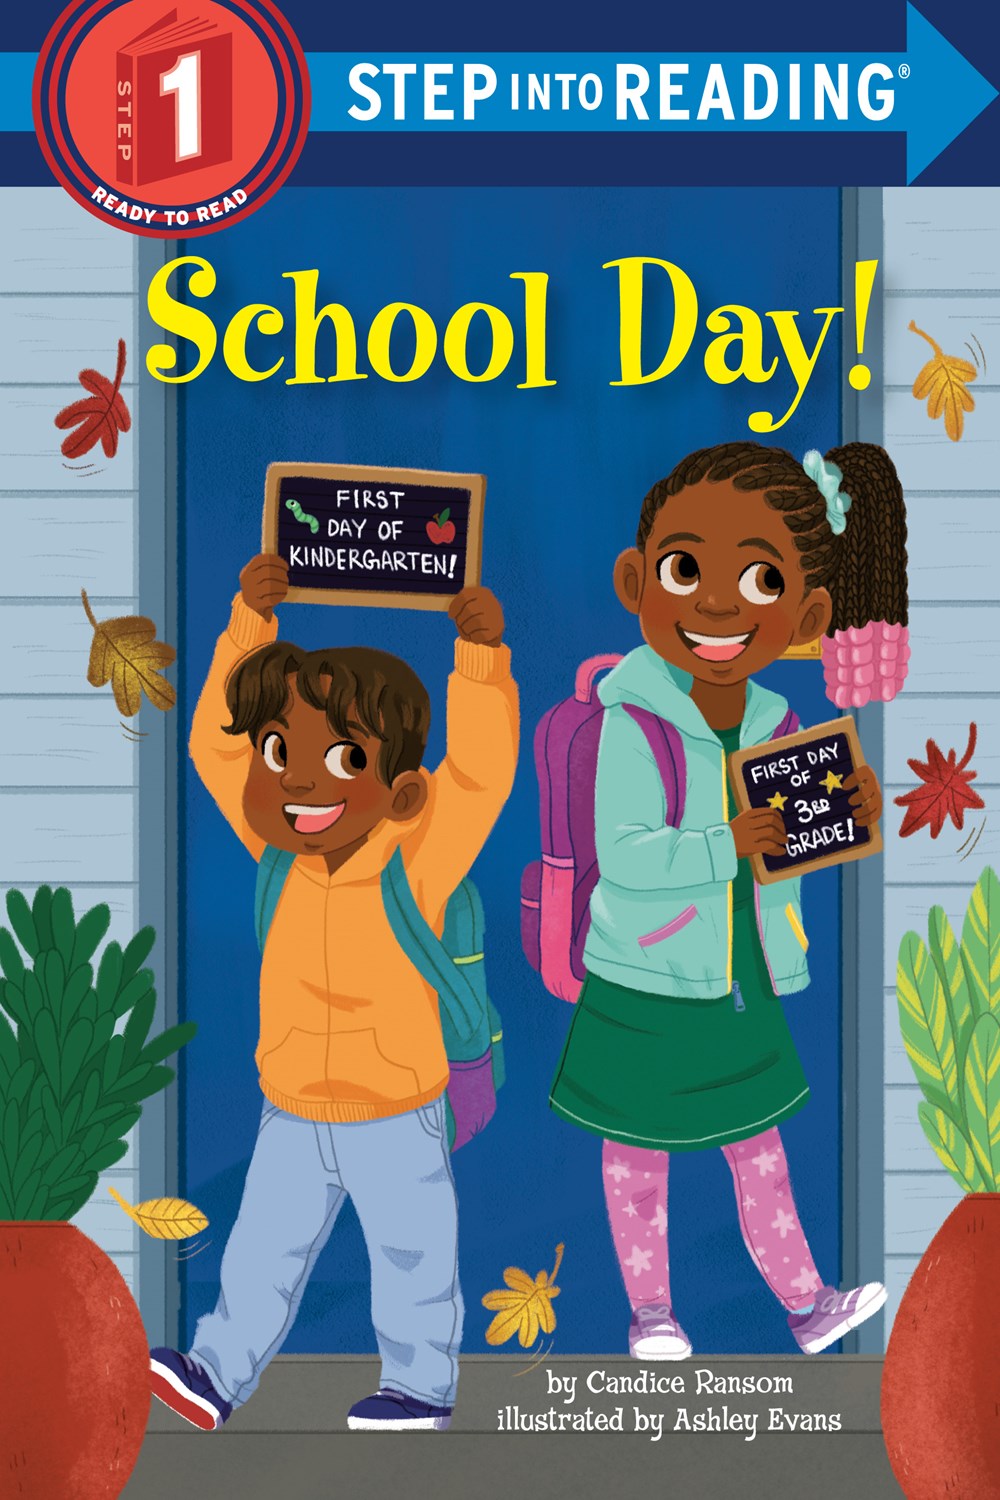 Step into Reading: School Day!